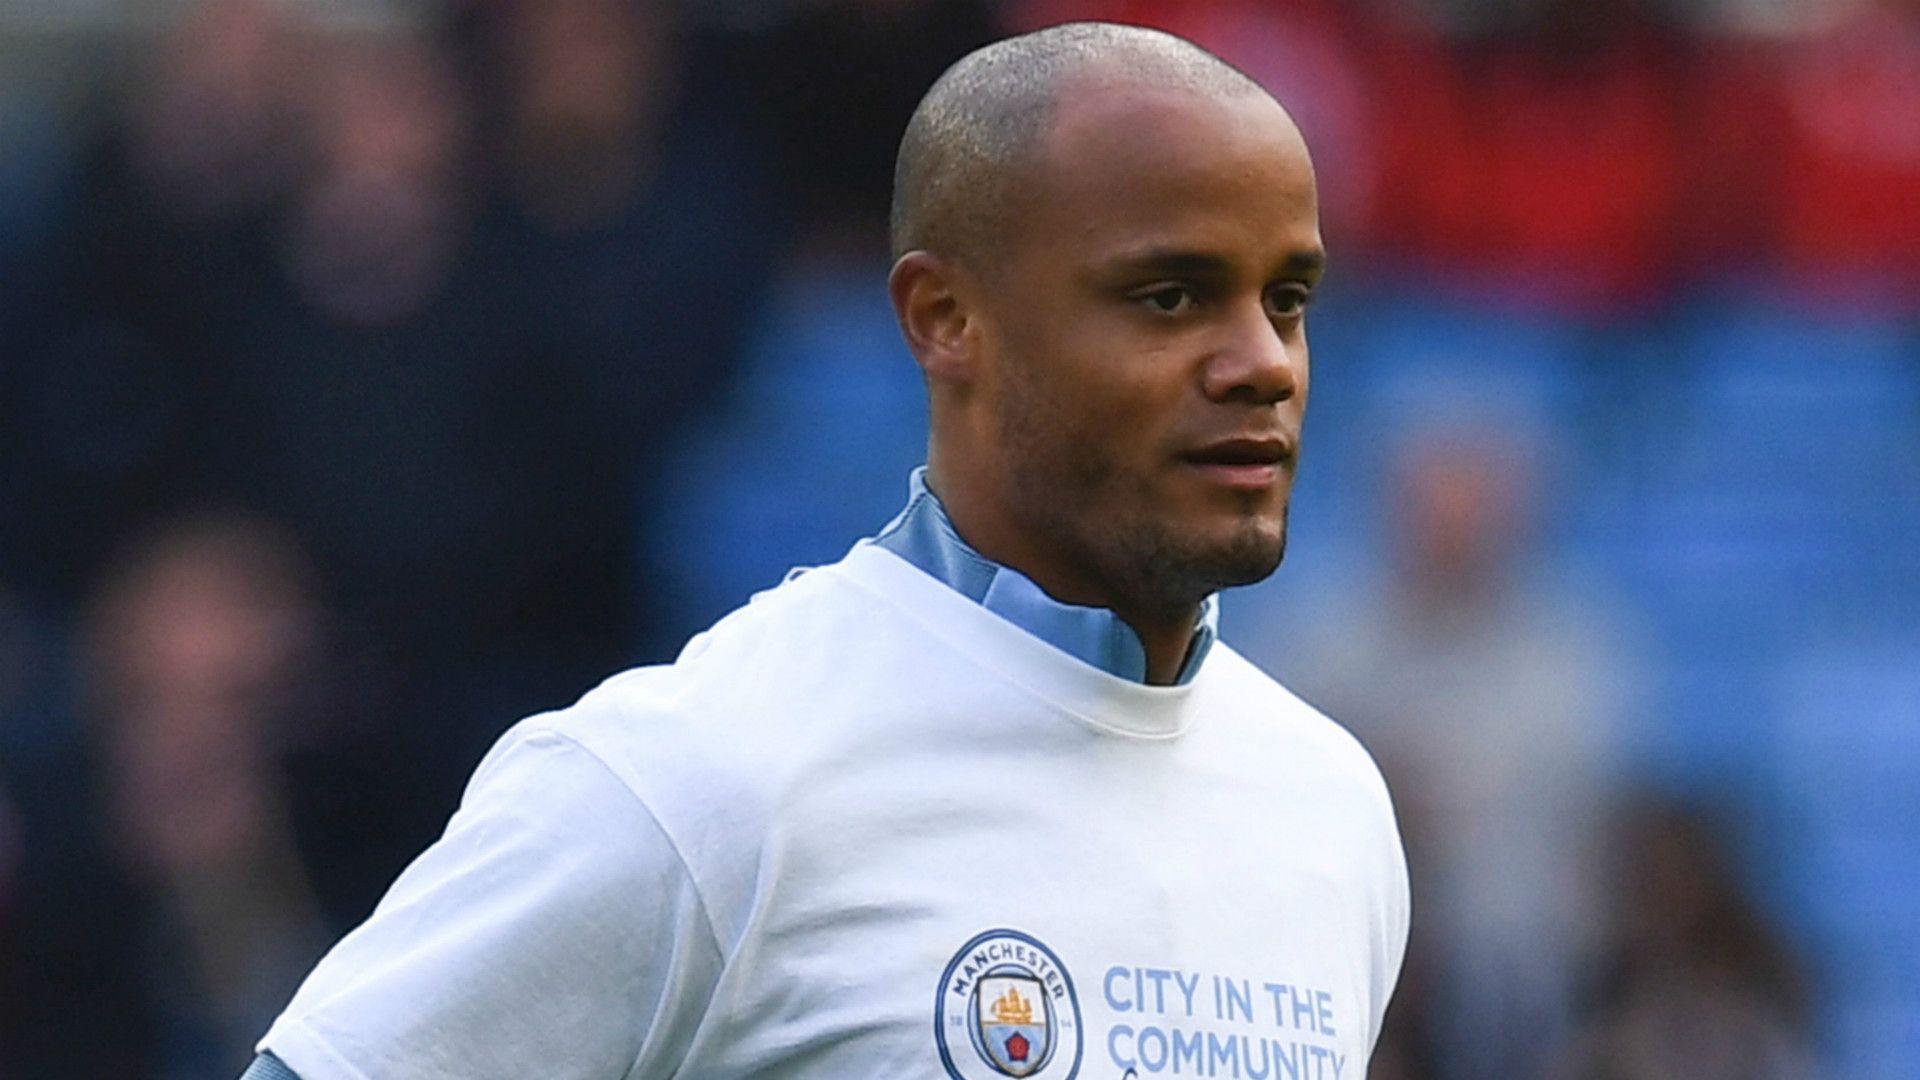 Premier League injury update: The latest on Vincent Kompany